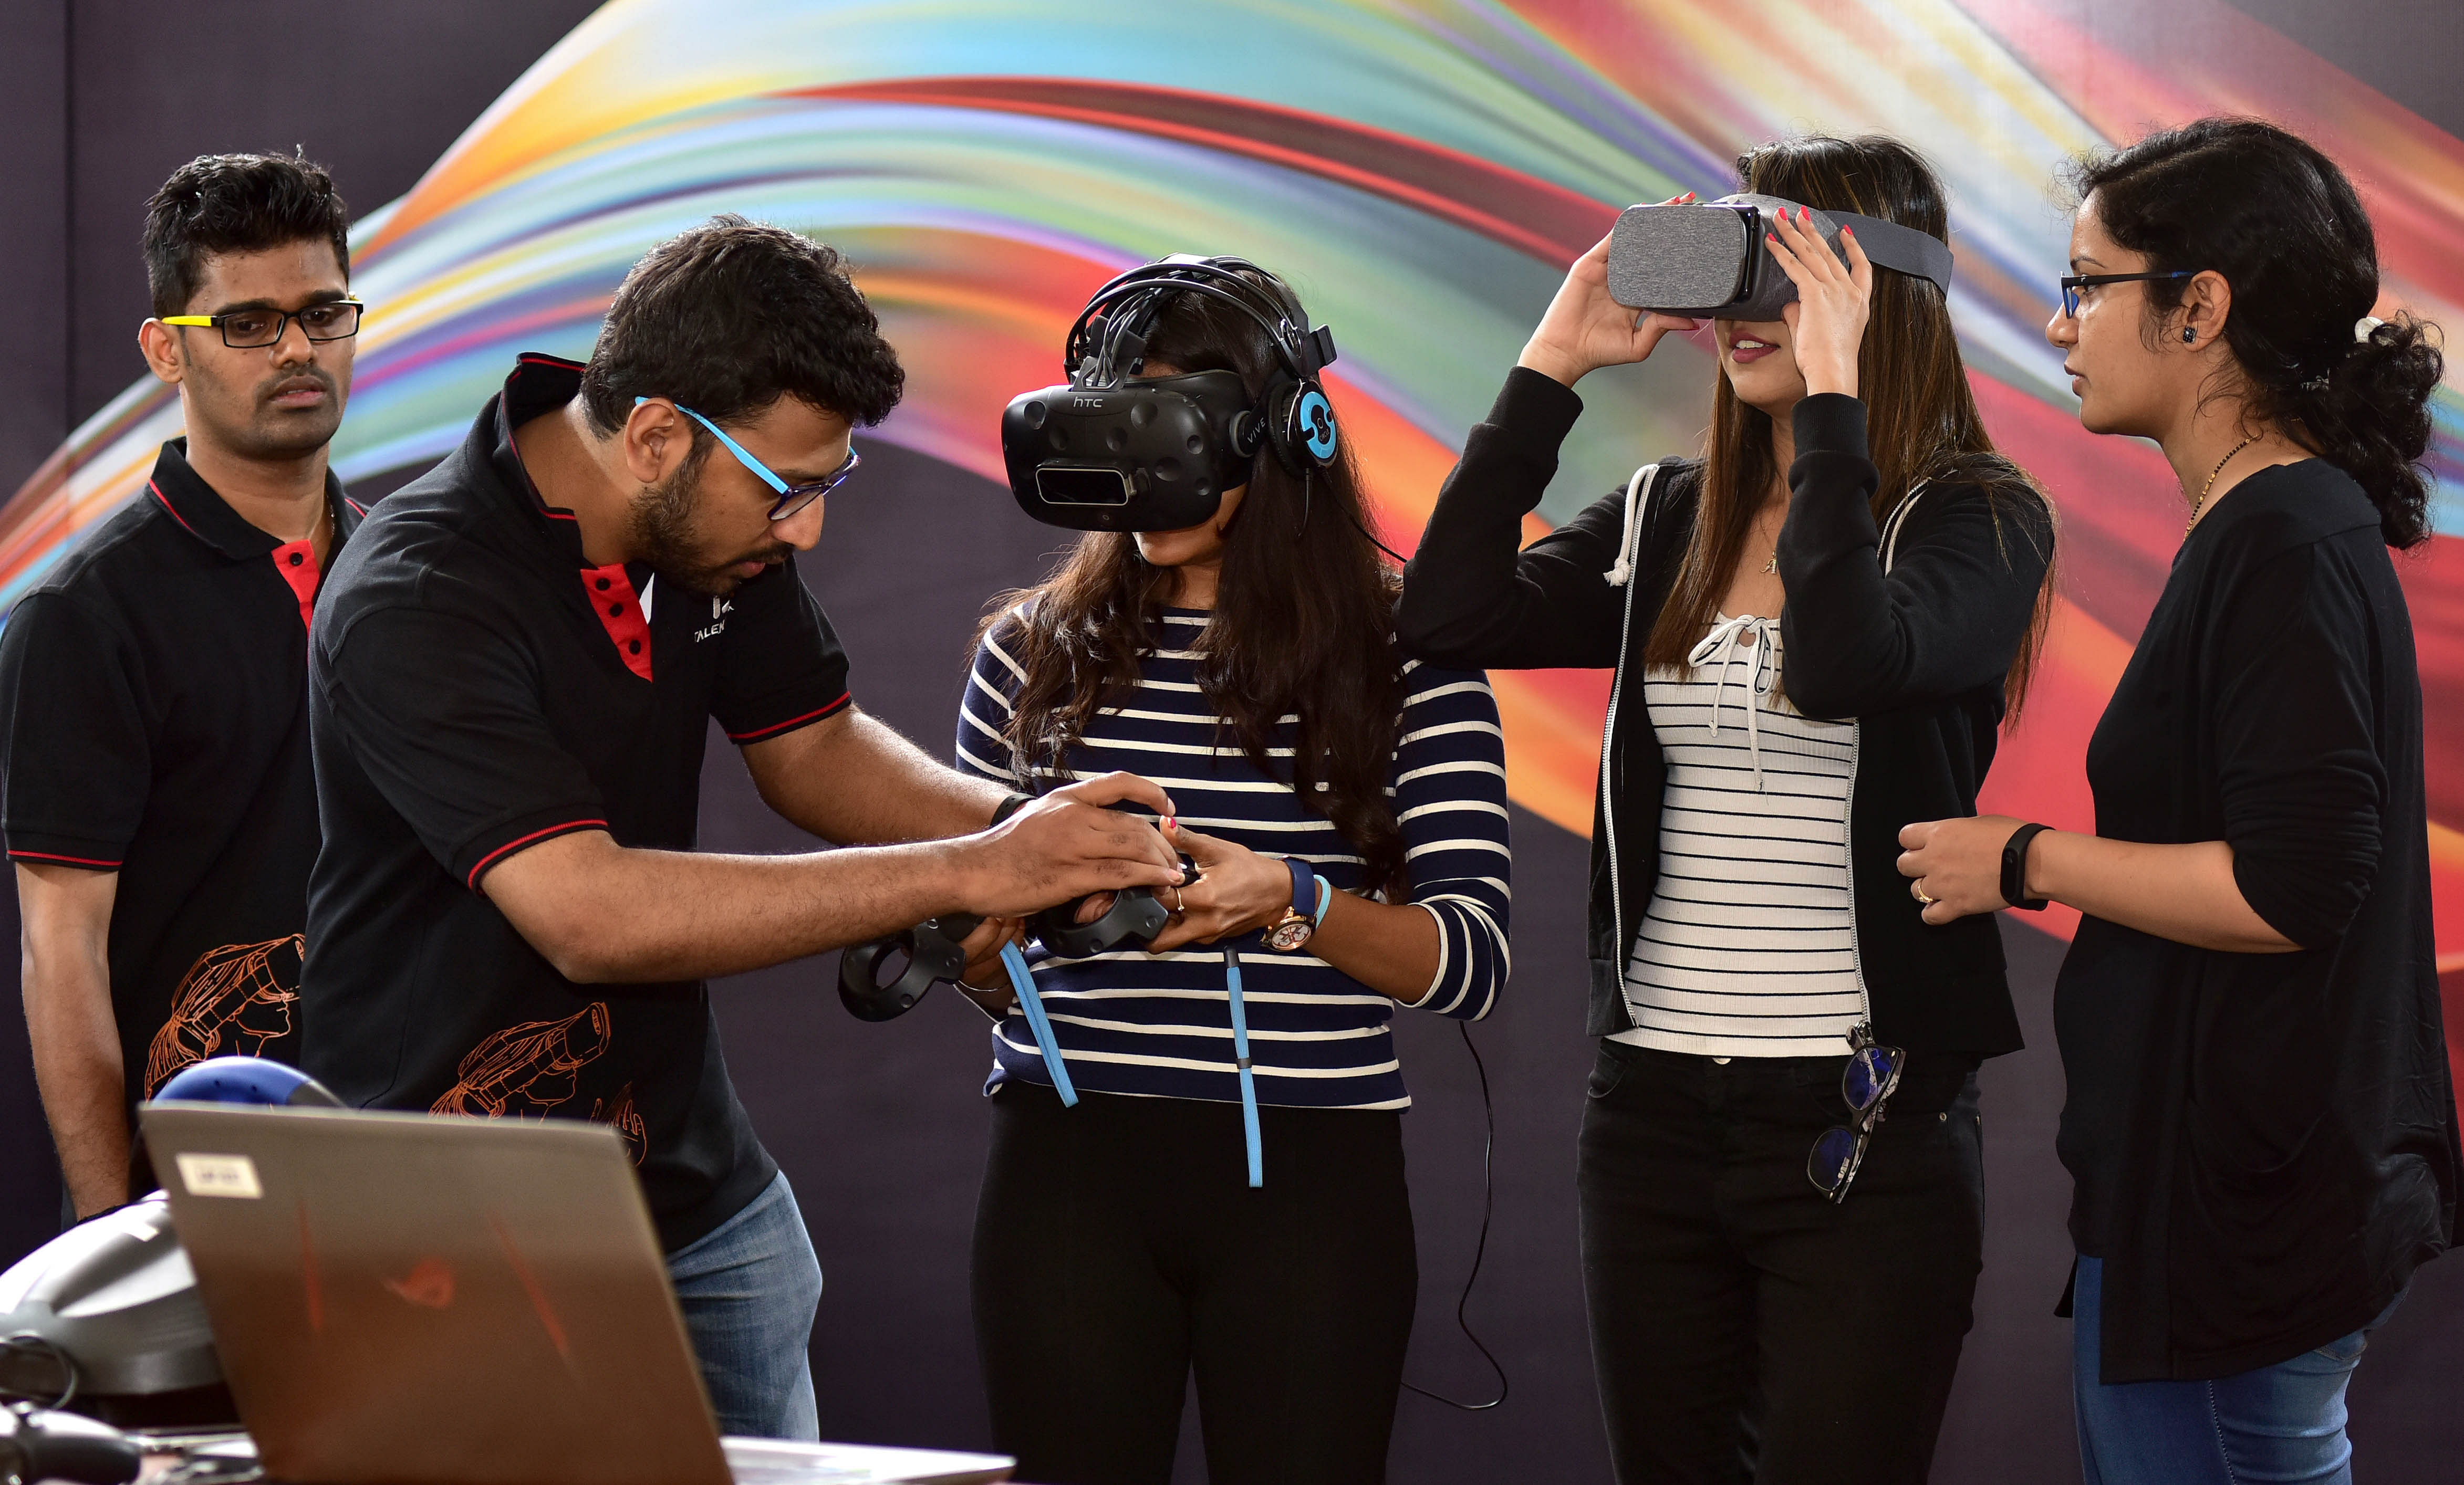 Unity Centre of Excellence for AR and VR in India was inaugurated today at PES University, organised by Talent Quest, Unity Technologies and PES University.